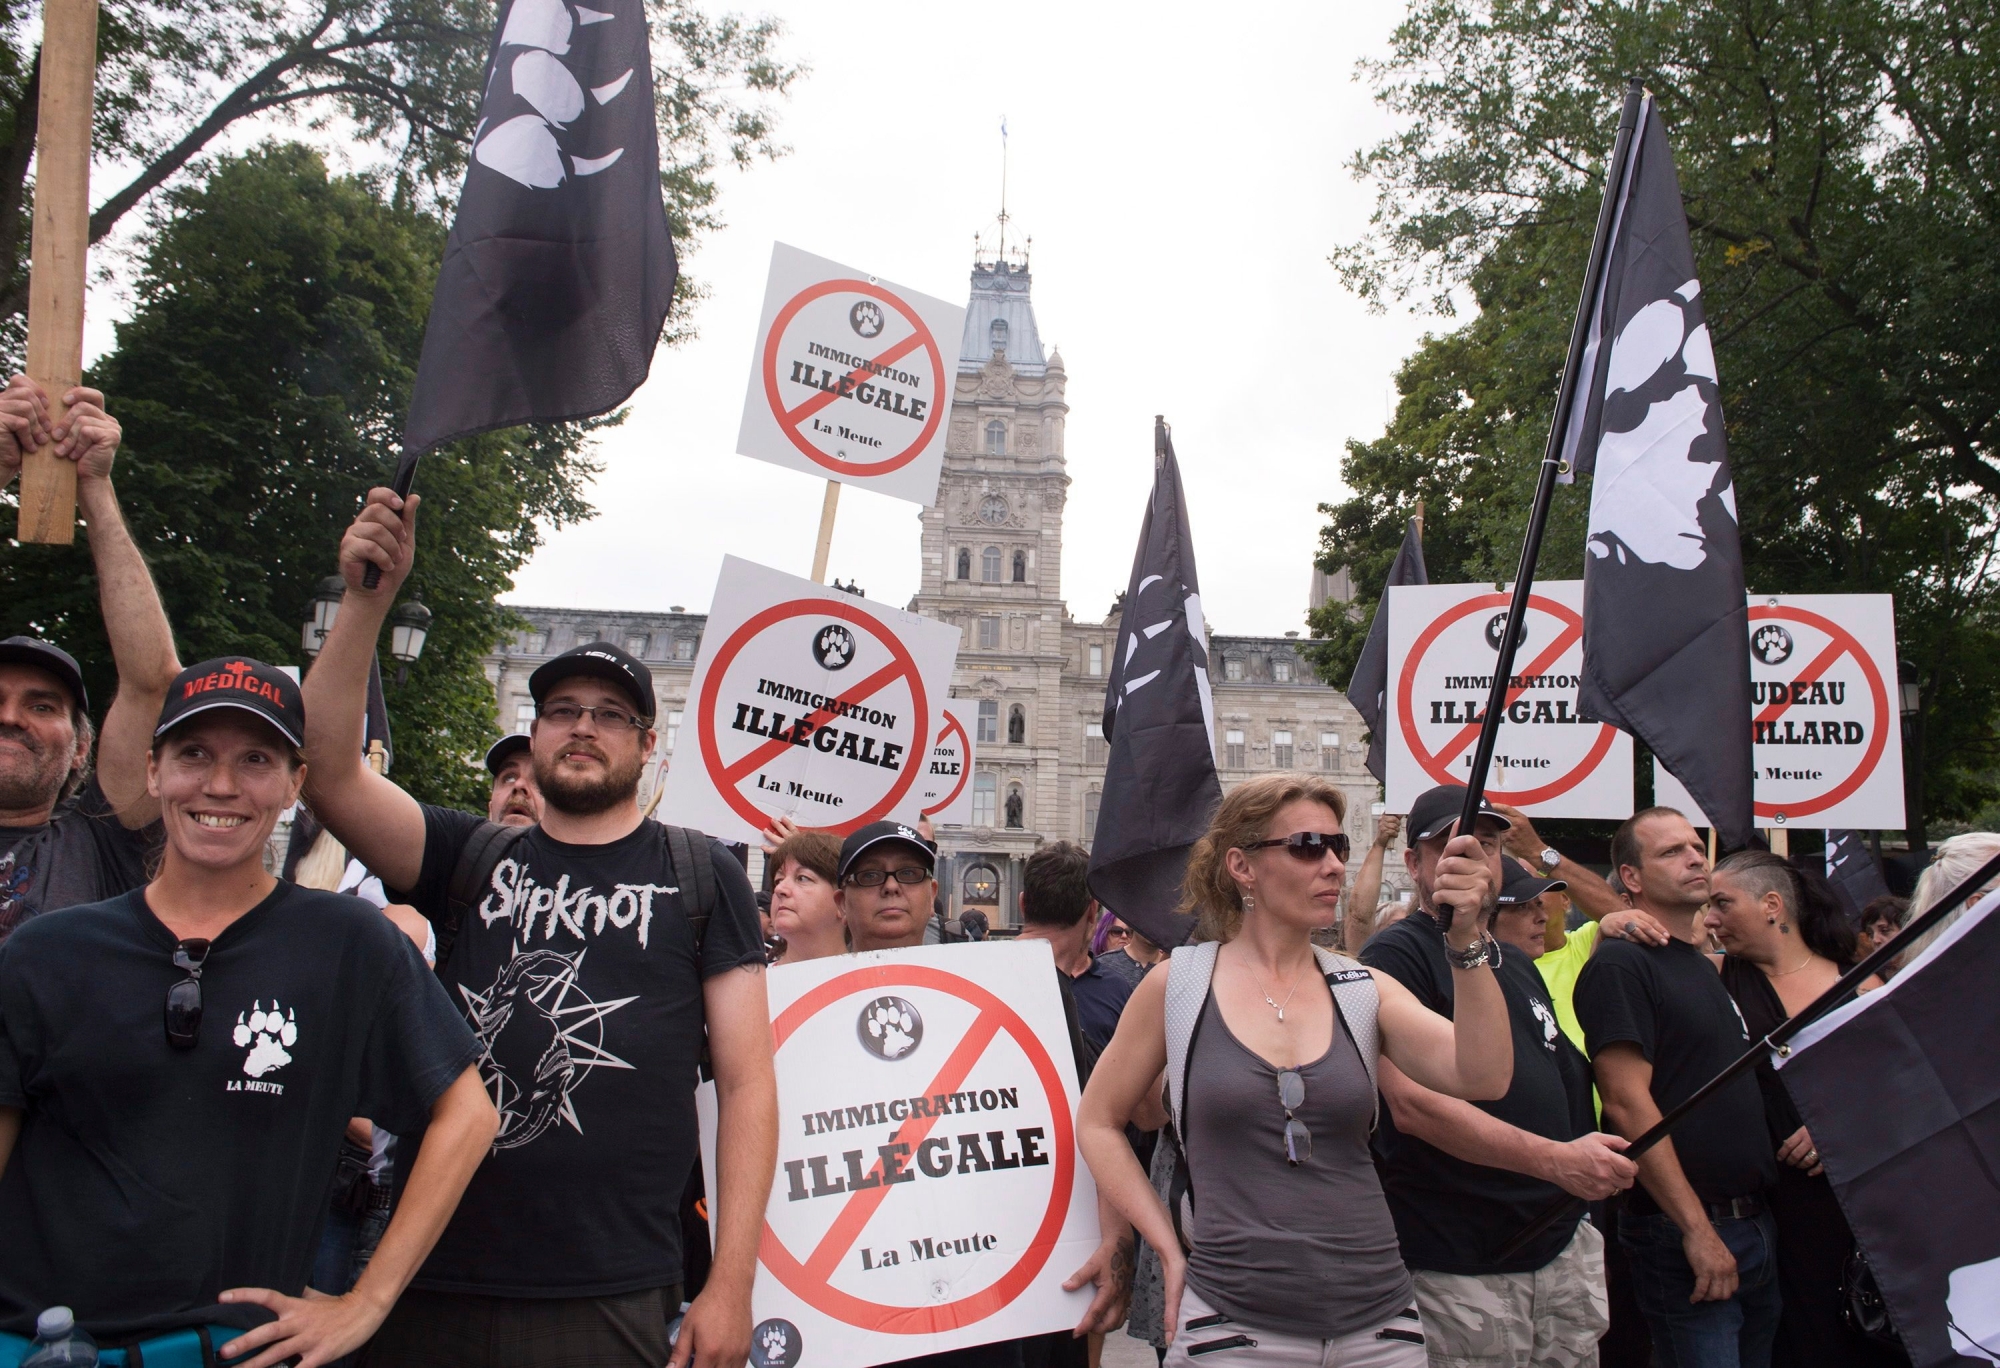 Demonstrators of a right wing group, "La Meute" demonstrate in silence in front of the legislature, Sunday, Aug. 20, 2017 in Quebec City, Quebec. Tensions boiled over in Quebec City on Sunday, as police were pelted by beer bottles and smoke bombs set off in garbage cans in an ugly end to a weekend of pro and anti-immigrant rallies across the country. (Jacques Boissinot/The Canadian Press via AP) Canada Right Rally